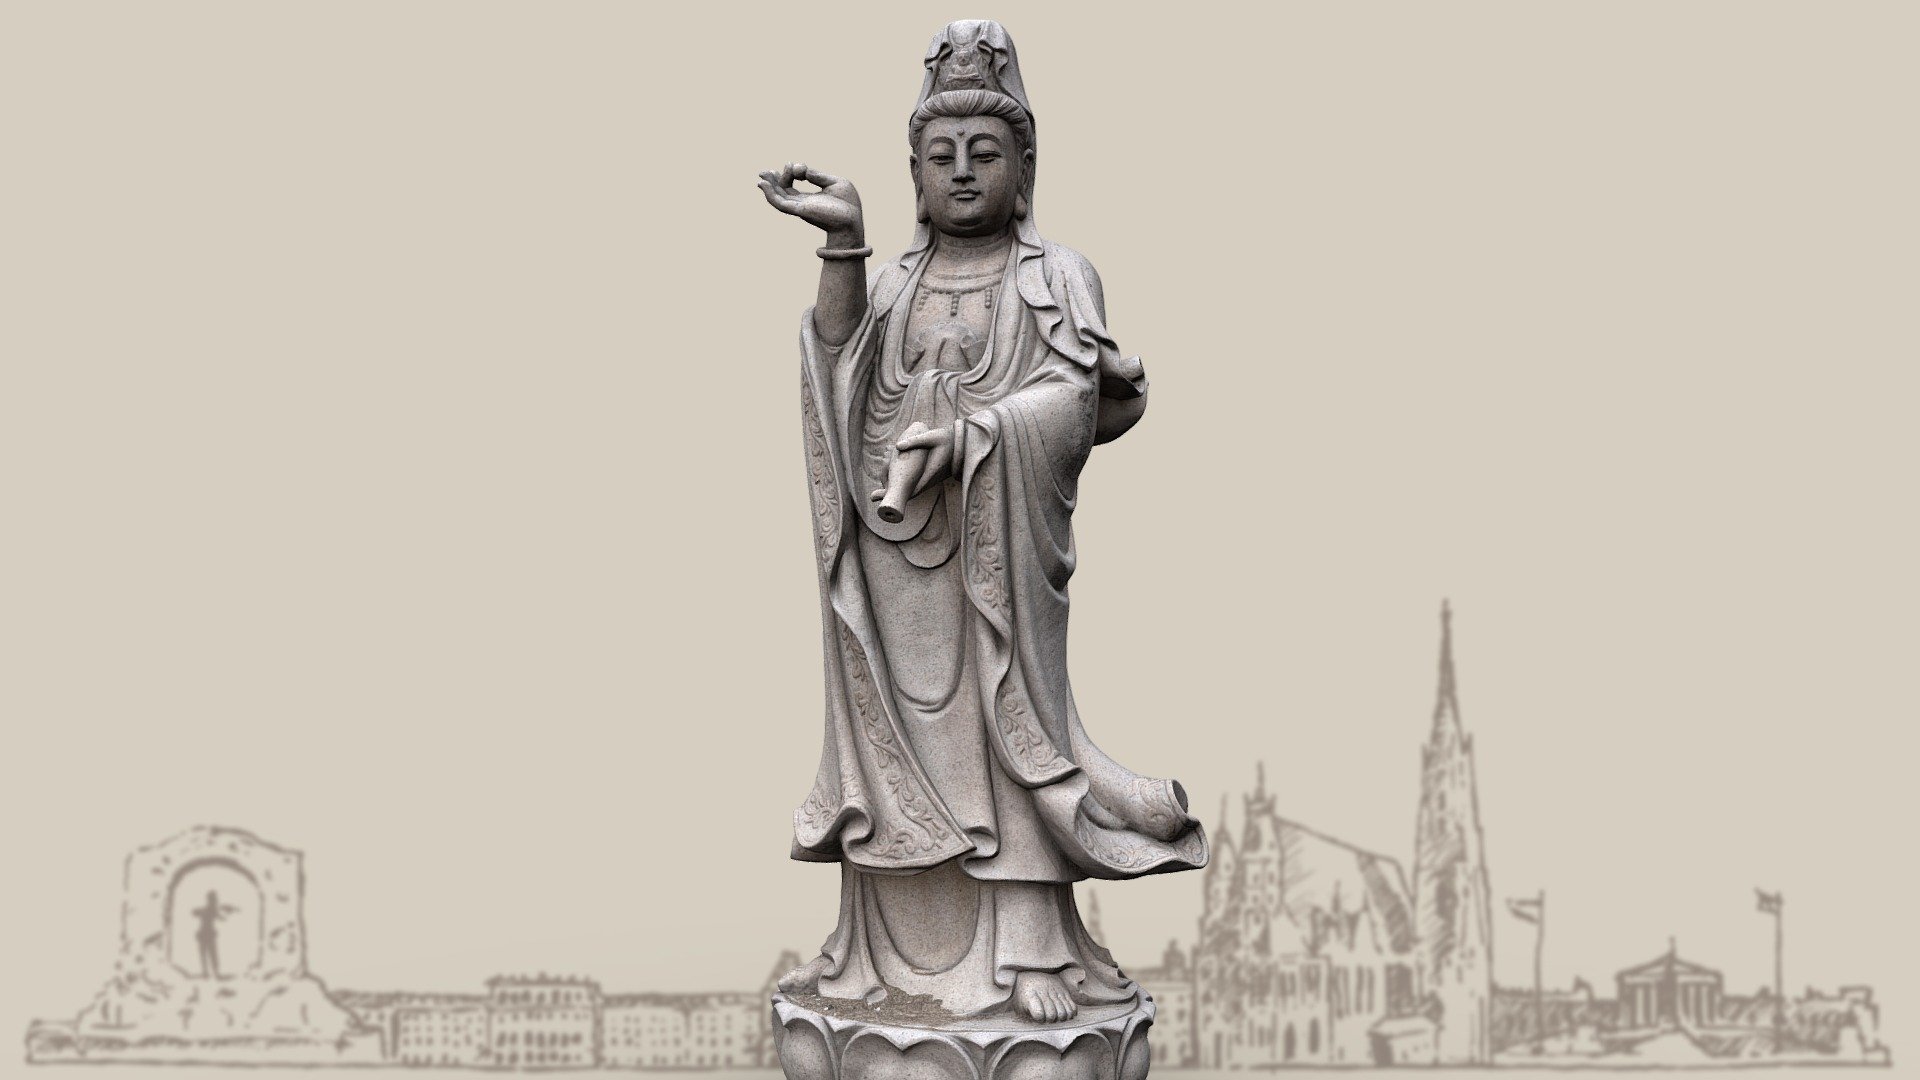 Guanyin Bodhisattva in the Hirschtetten Flower Gardens. The statue of the Goddess of Mercy and Peace is a gift from the county government of Qingtian, Zhejiang and was erected in the course of the redesign of the Chinese Garden in 2009 3d model